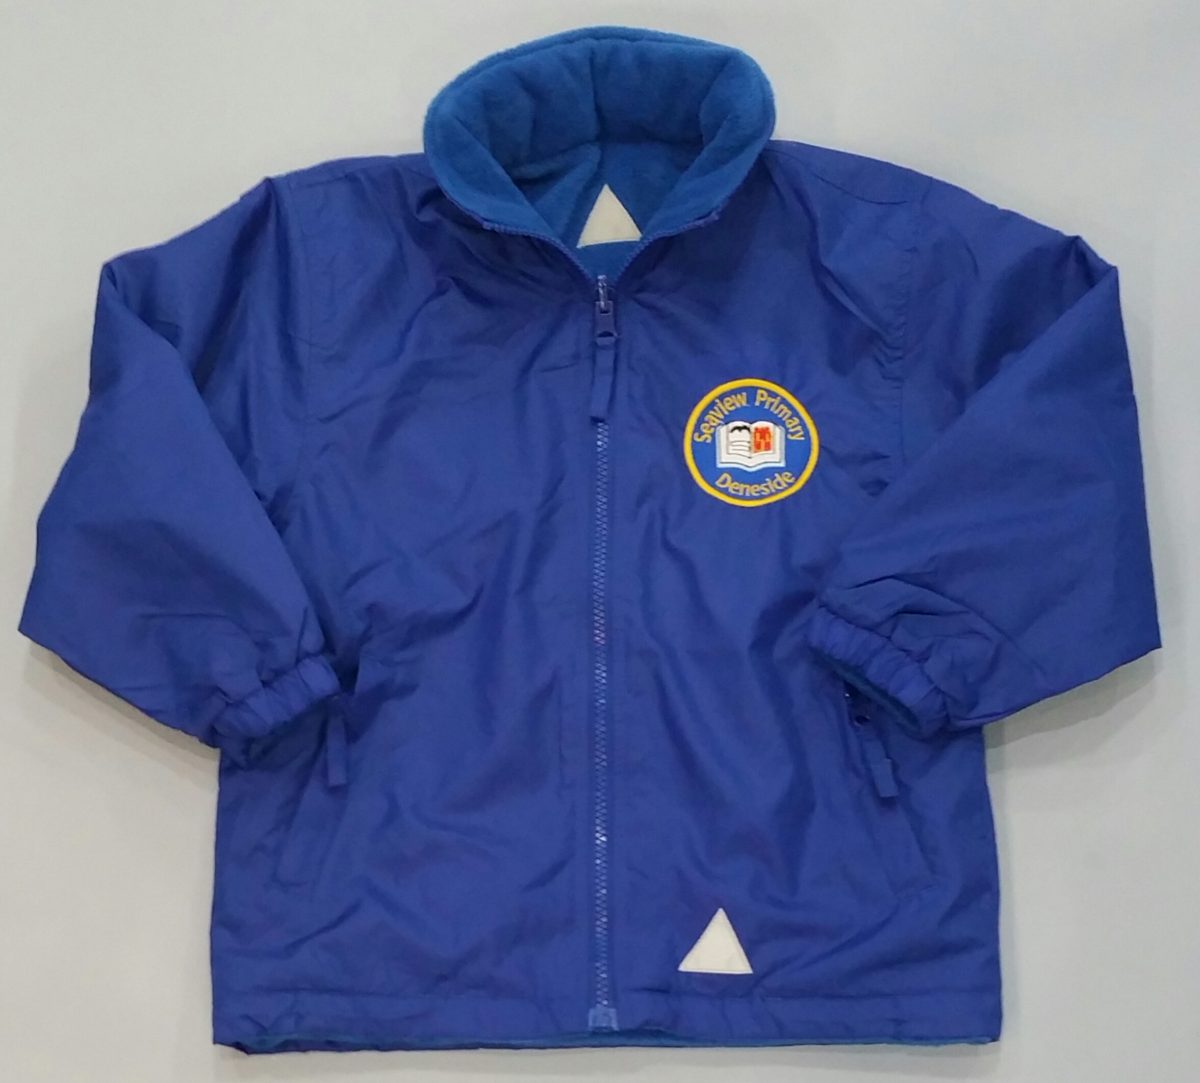 DEEP ROYAL BLUE REVERSIBLE JACKET with embroidered school logo